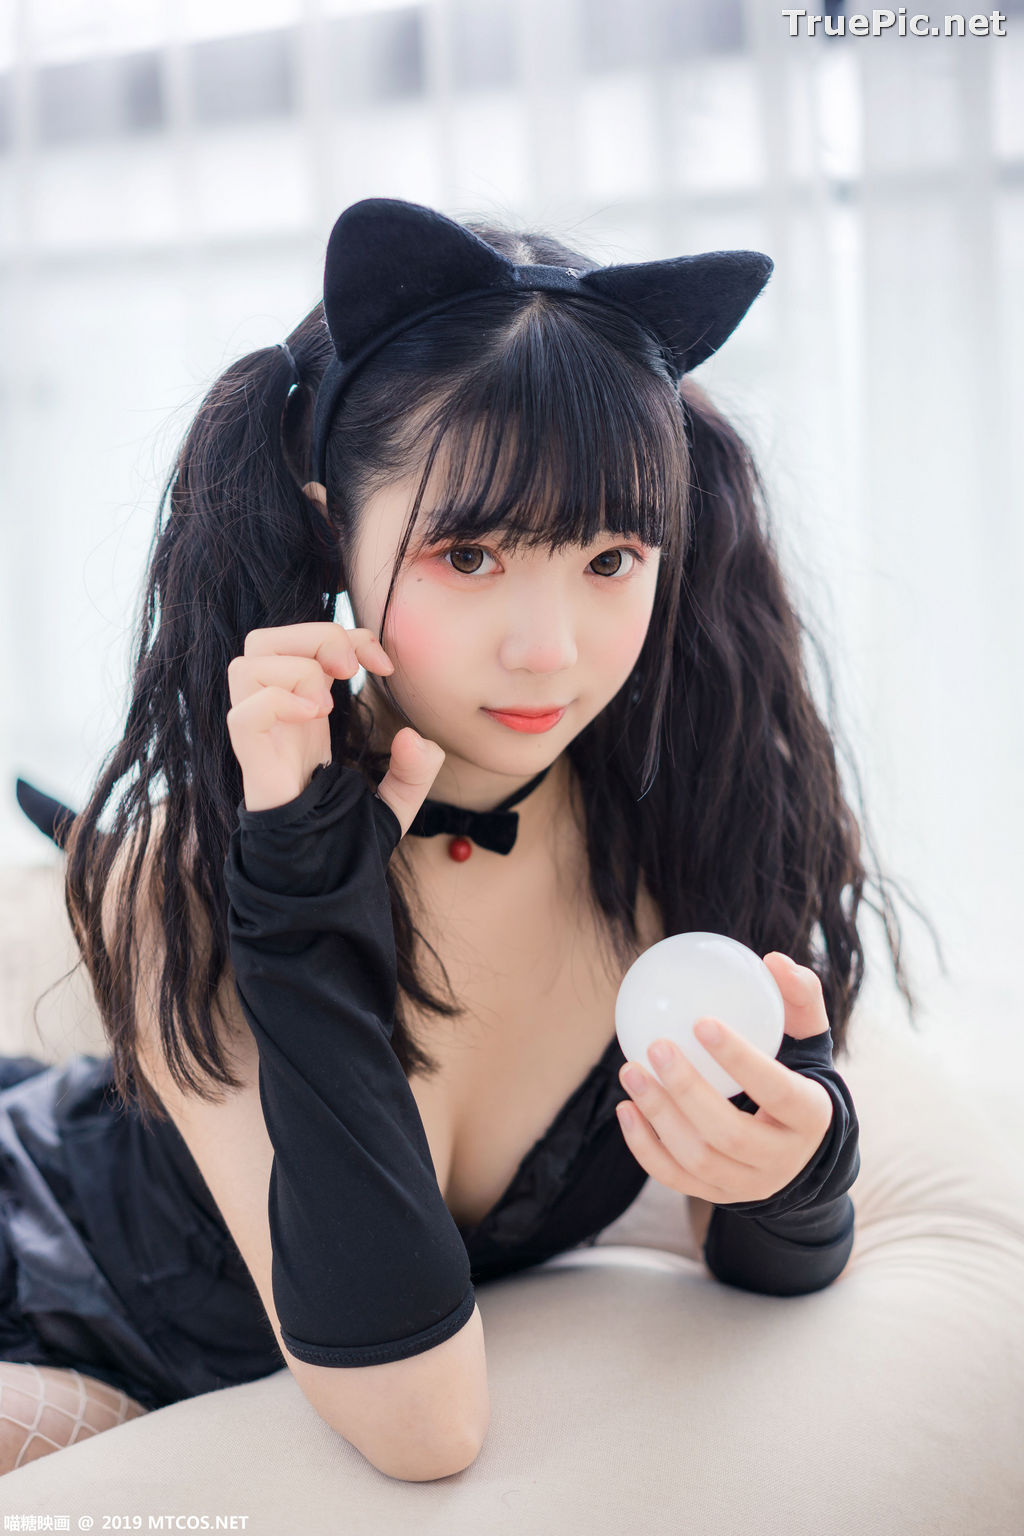 Image [MTCos] 喵糖映画 Vol.045 – Chinese Cute Model – Black Cat Girl - TruePic.net - Picture-1